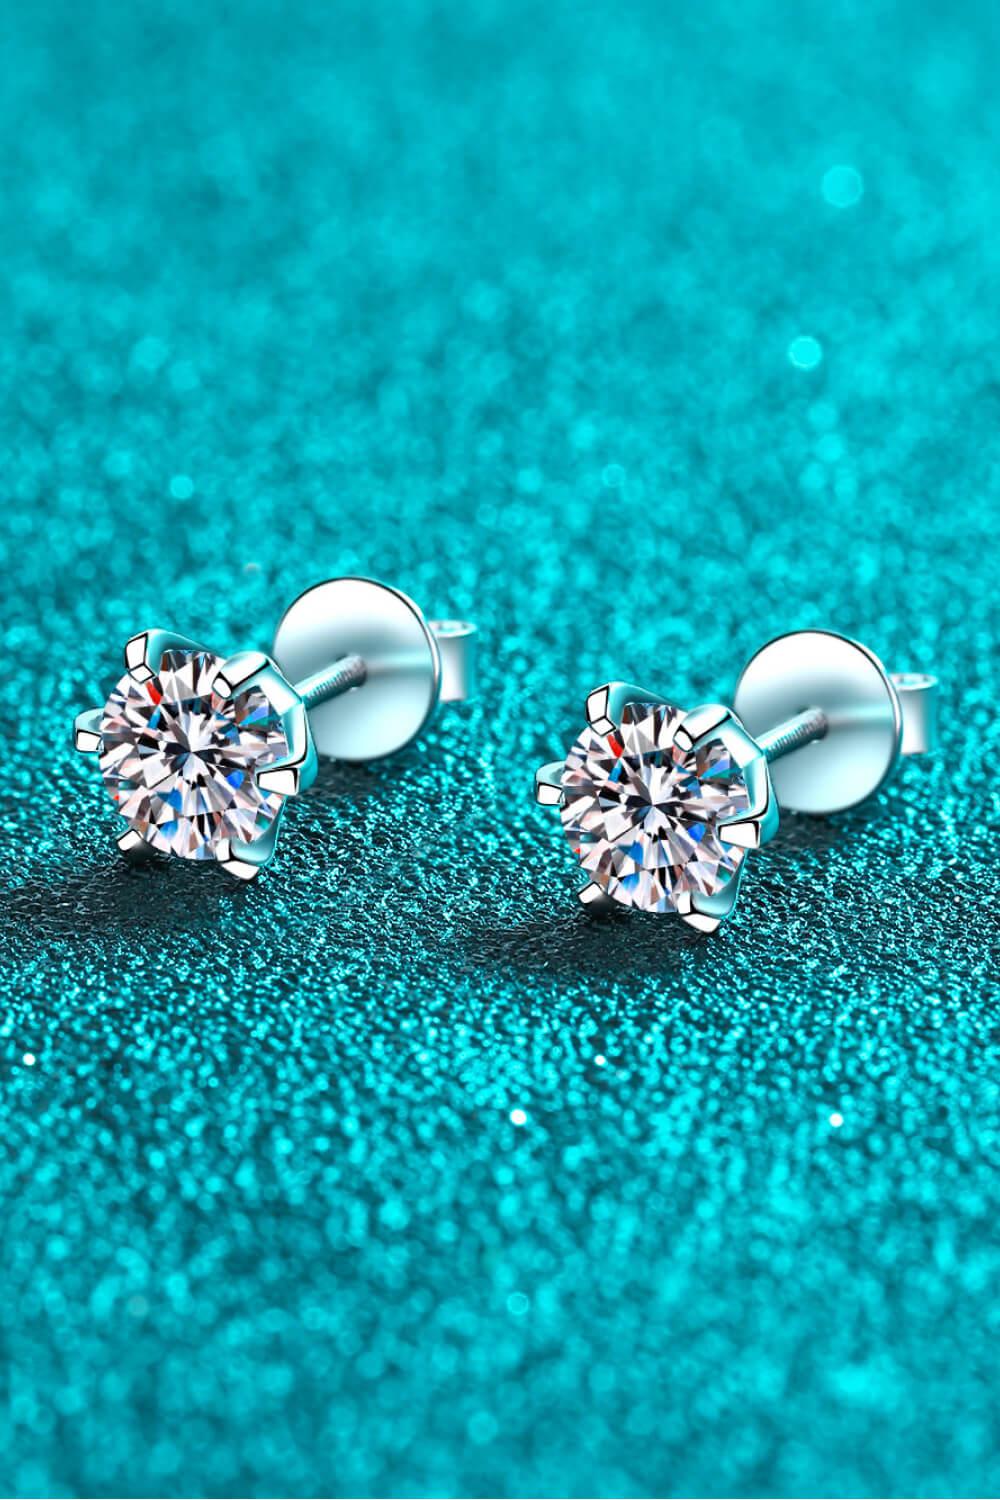 2 Carat Inlaid Moissanite Stud Earrings BLUE ZONE PLANET